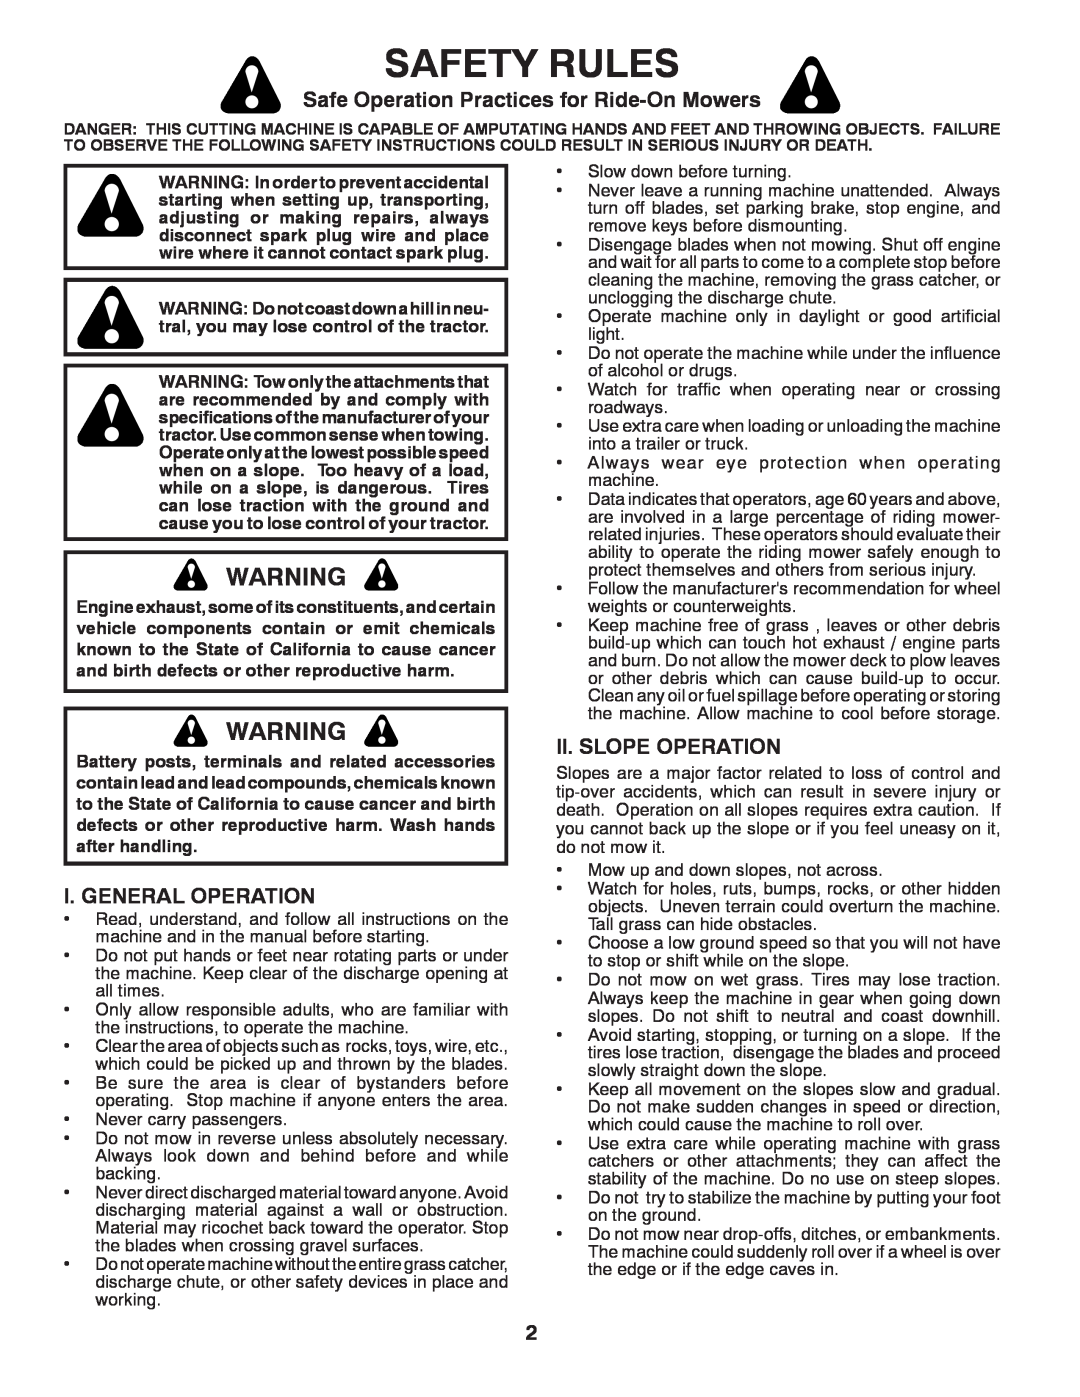 Poulan 433413 manual Safety Rules, Safe Operation Practices for Ride-On Mowers, I. General Operation, Ii. Slope Operation 